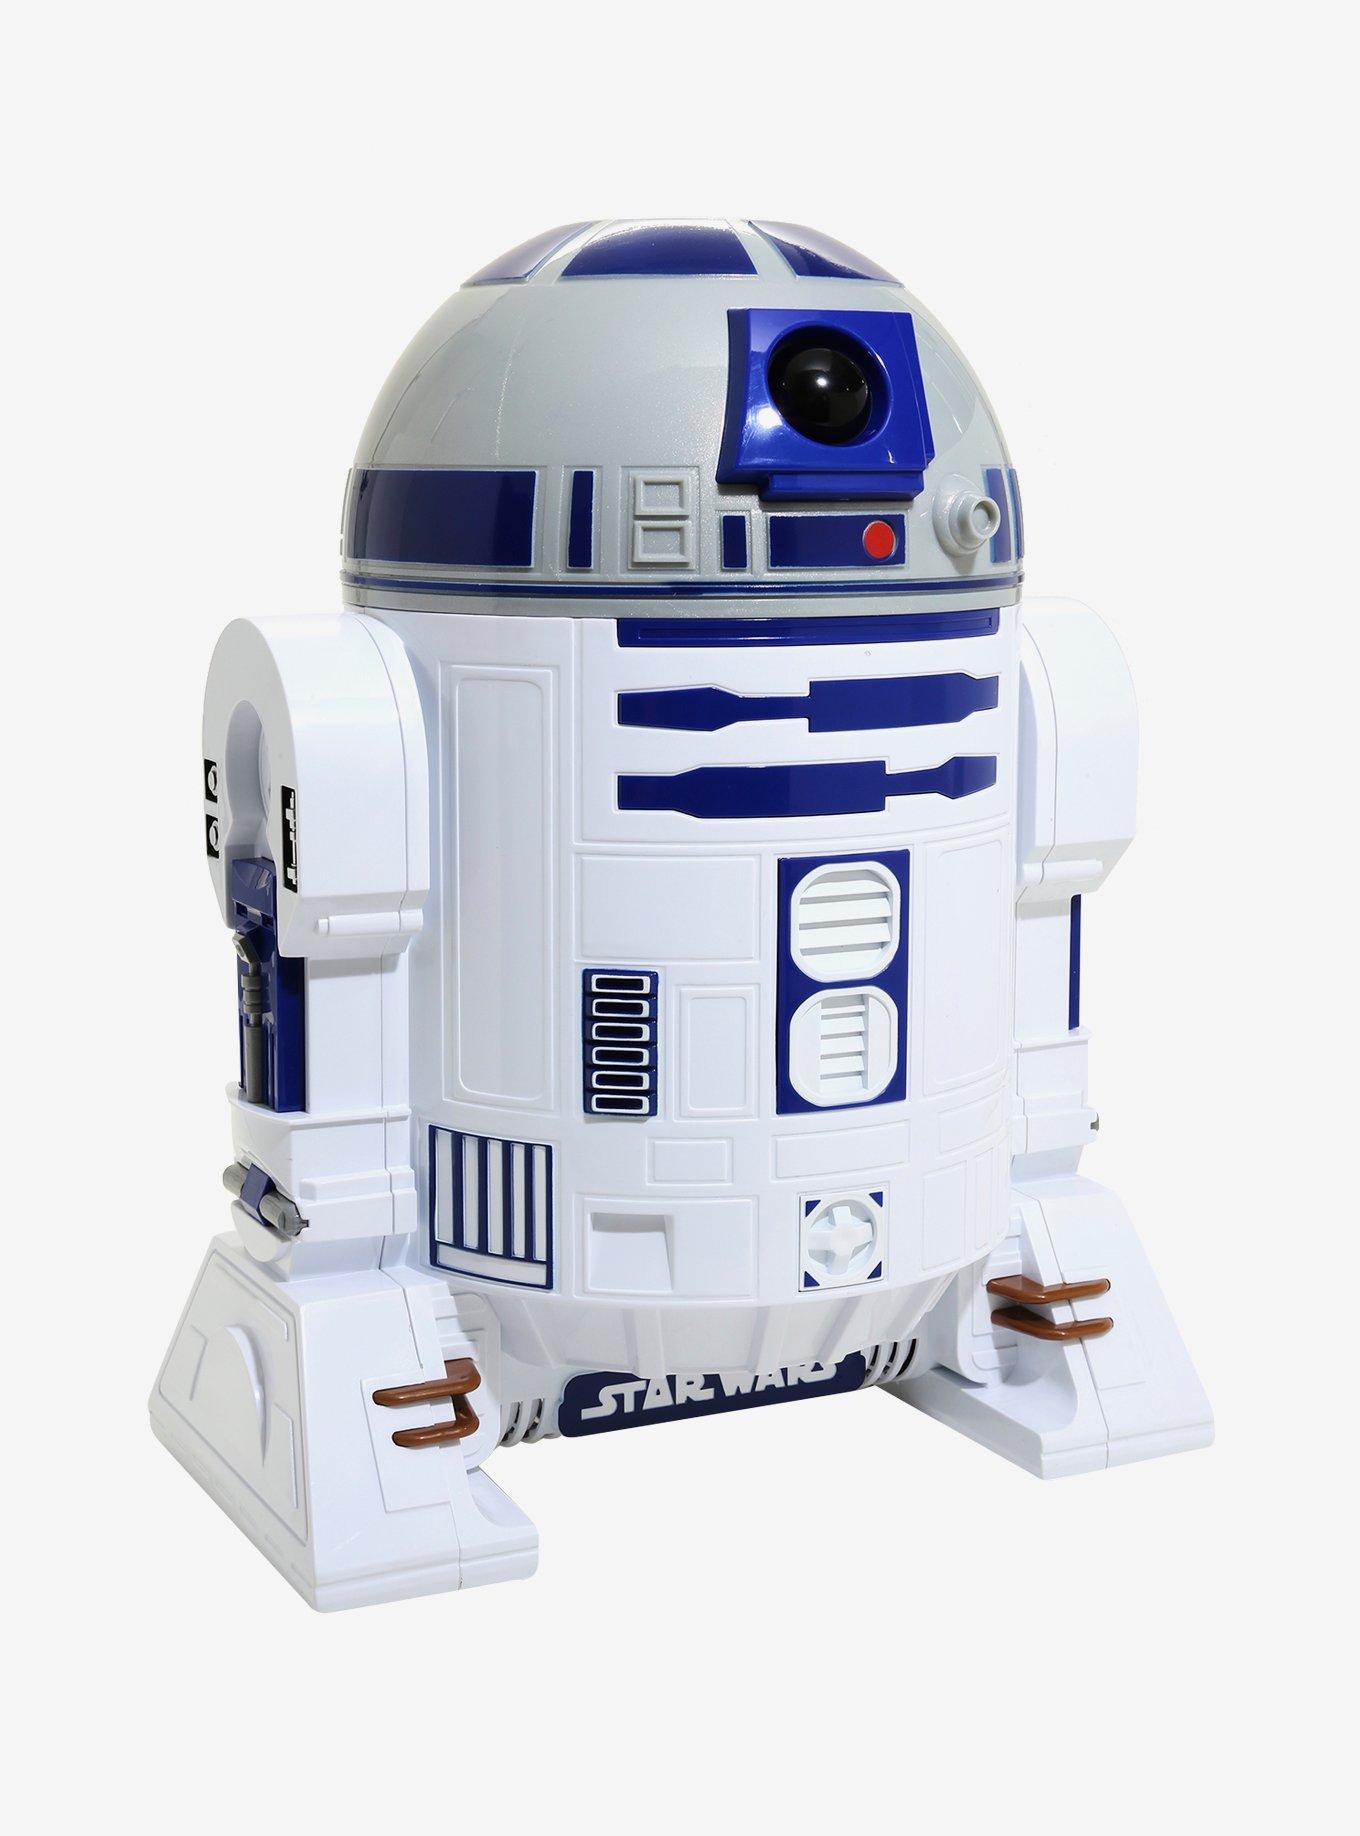 Bring The Force To Snack Time Thanks To This R2-D2 Popcorn Maker - Inside  the Magic